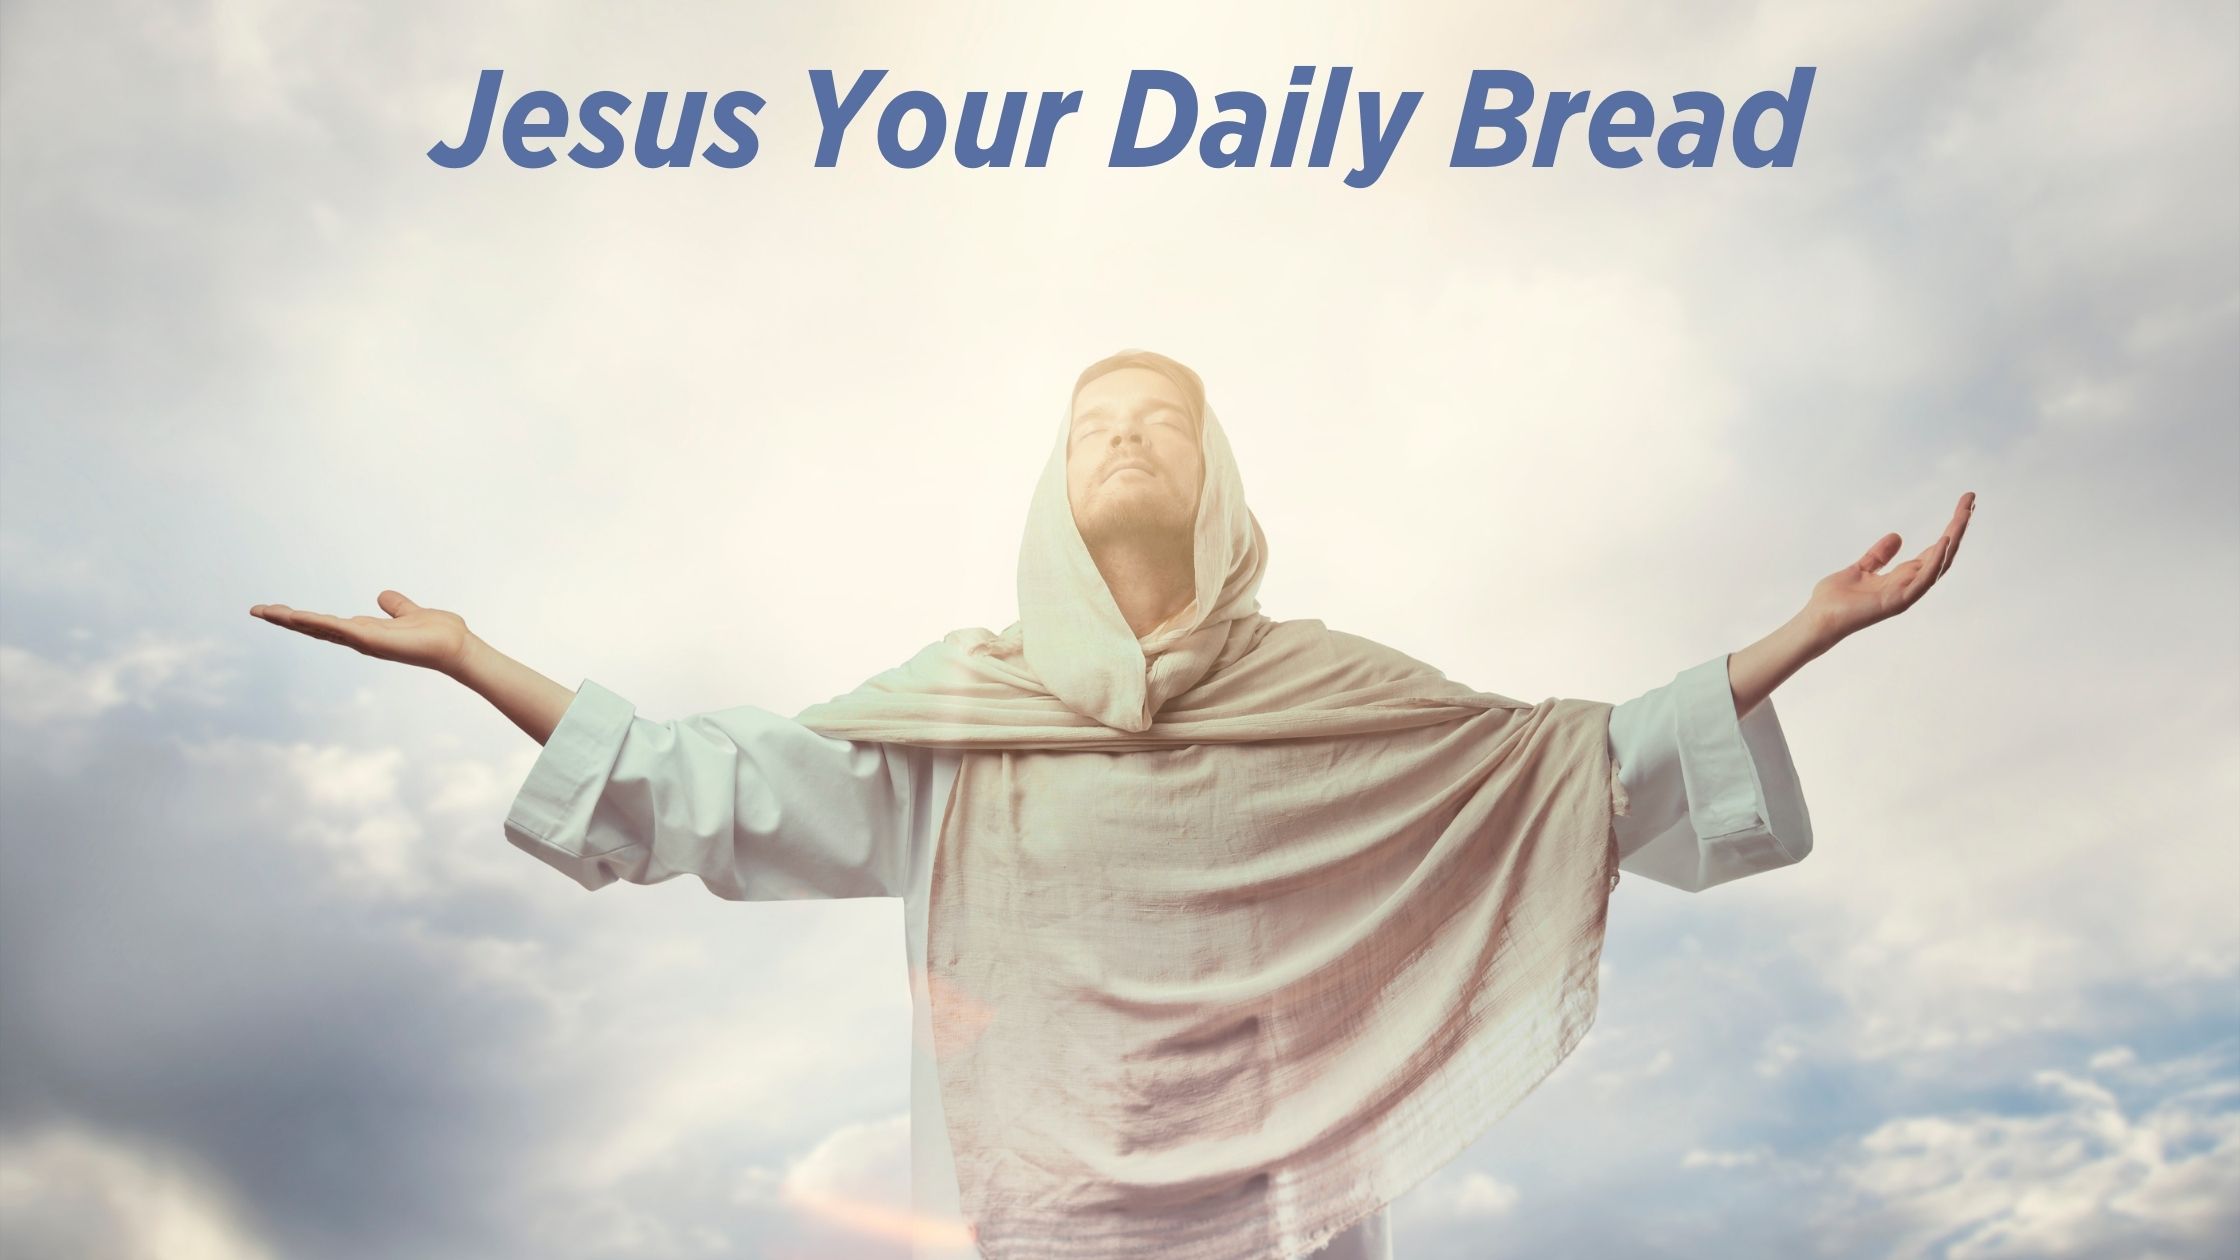 Jesus your daily bread